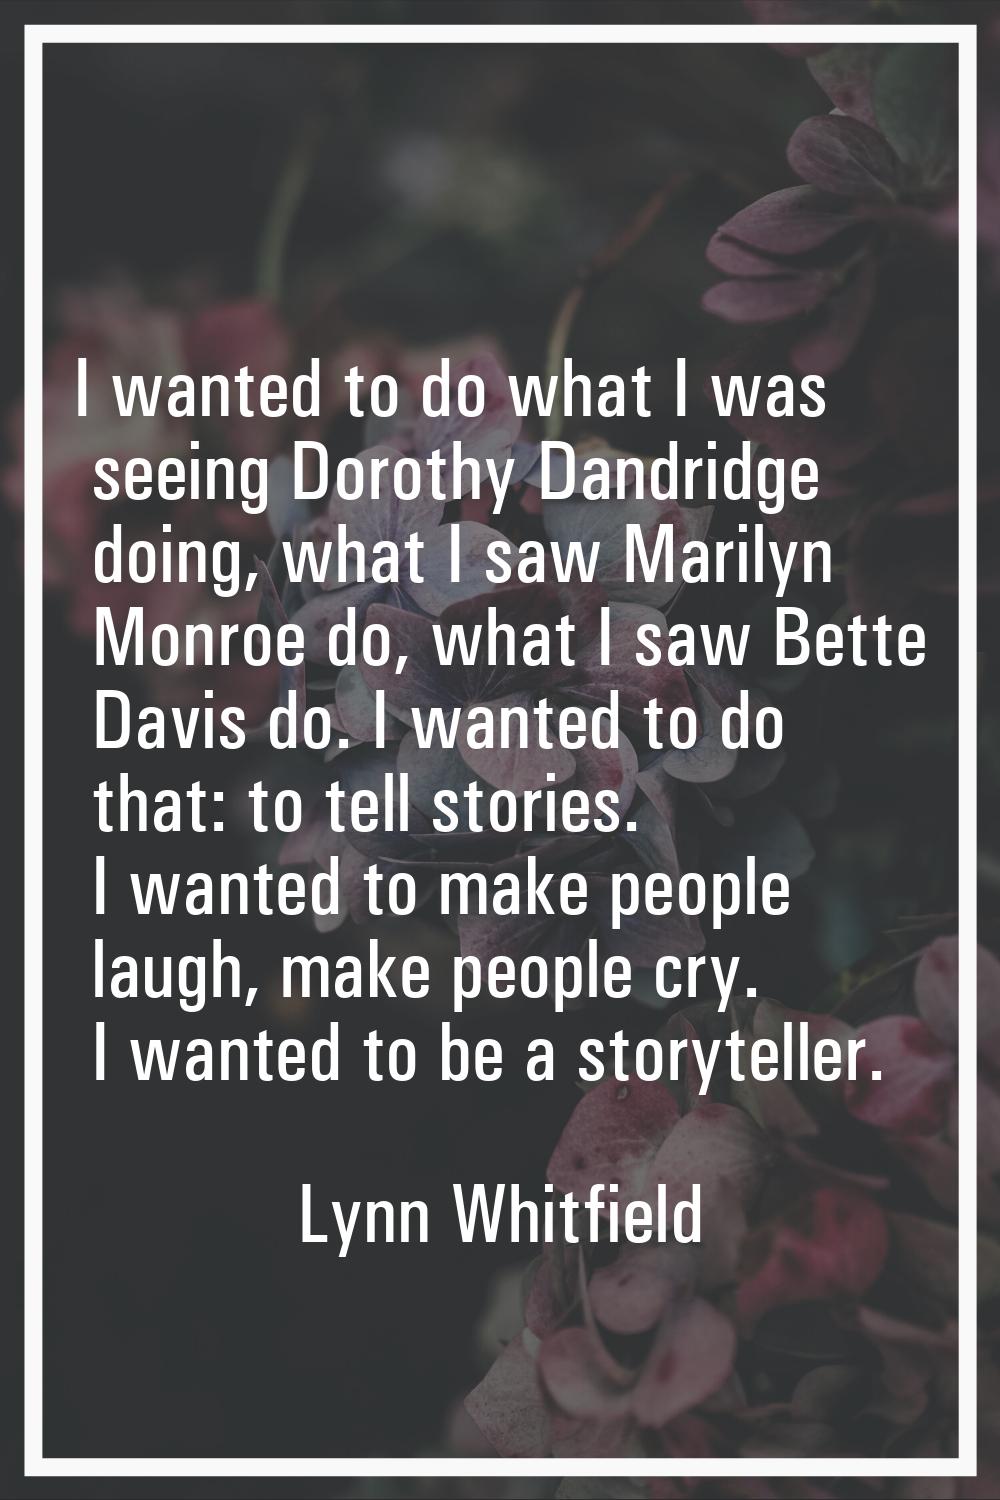 I wanted to do what I was seeing Dorothy Dandridge doing, what I saw Marilyn Monroe do, what I saw 